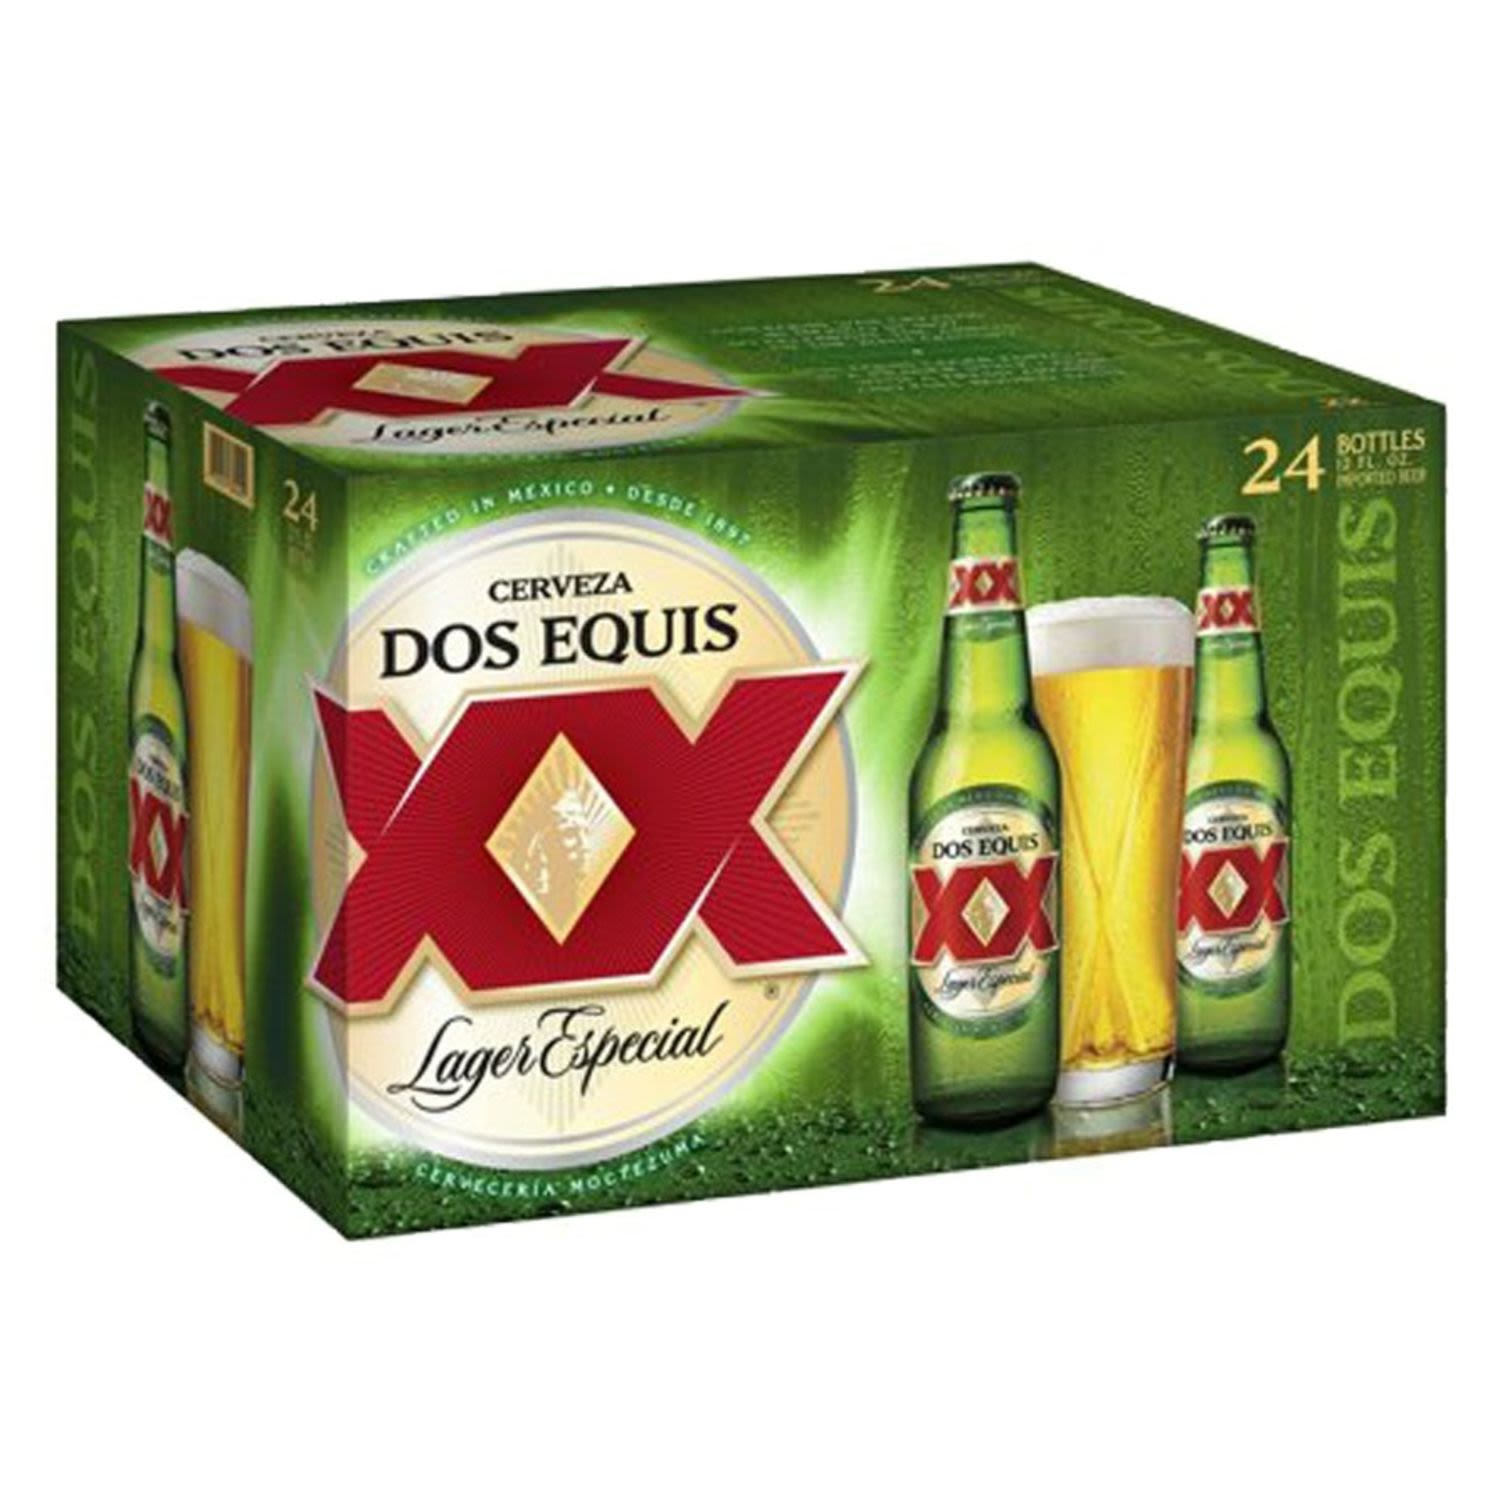 Dos Equis XX Lager Especial Bottle Case 355mL 24 Pack